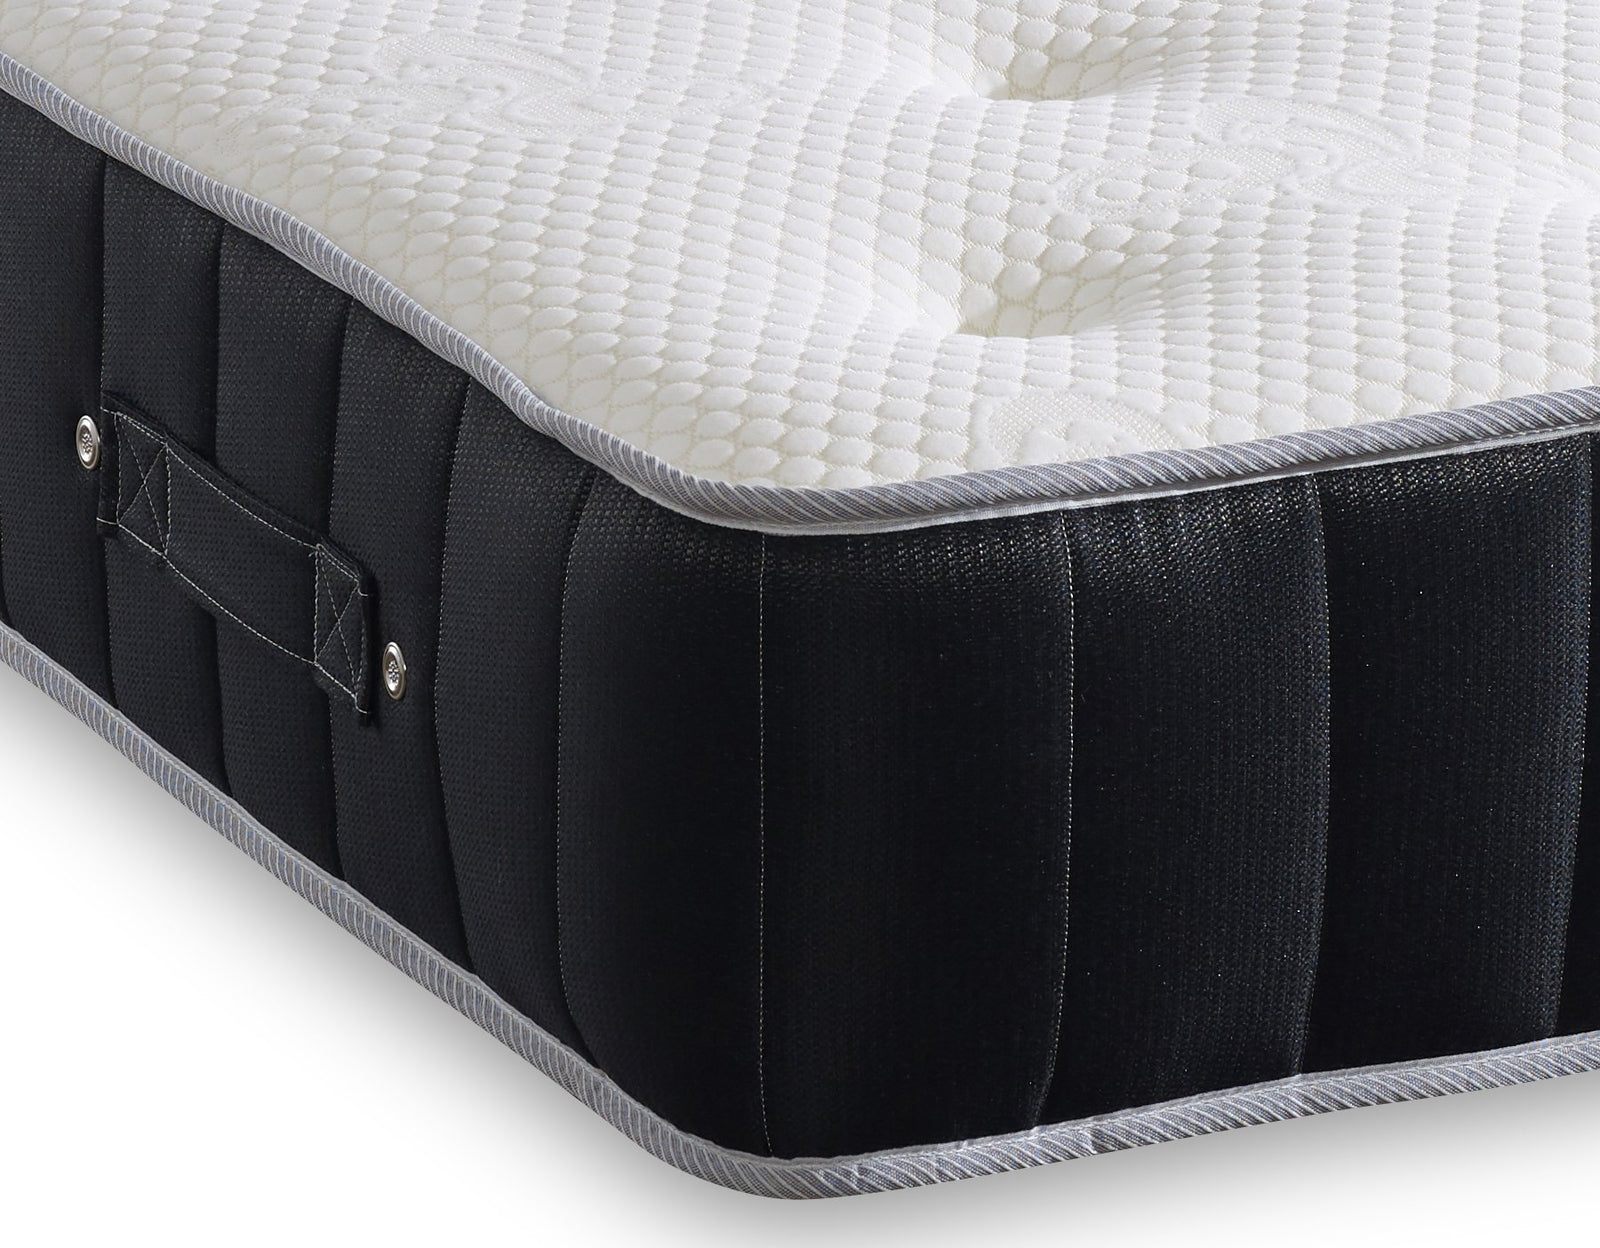 Why Buying a Memory Foam Mattress is a Fantastic Long-Term Investment